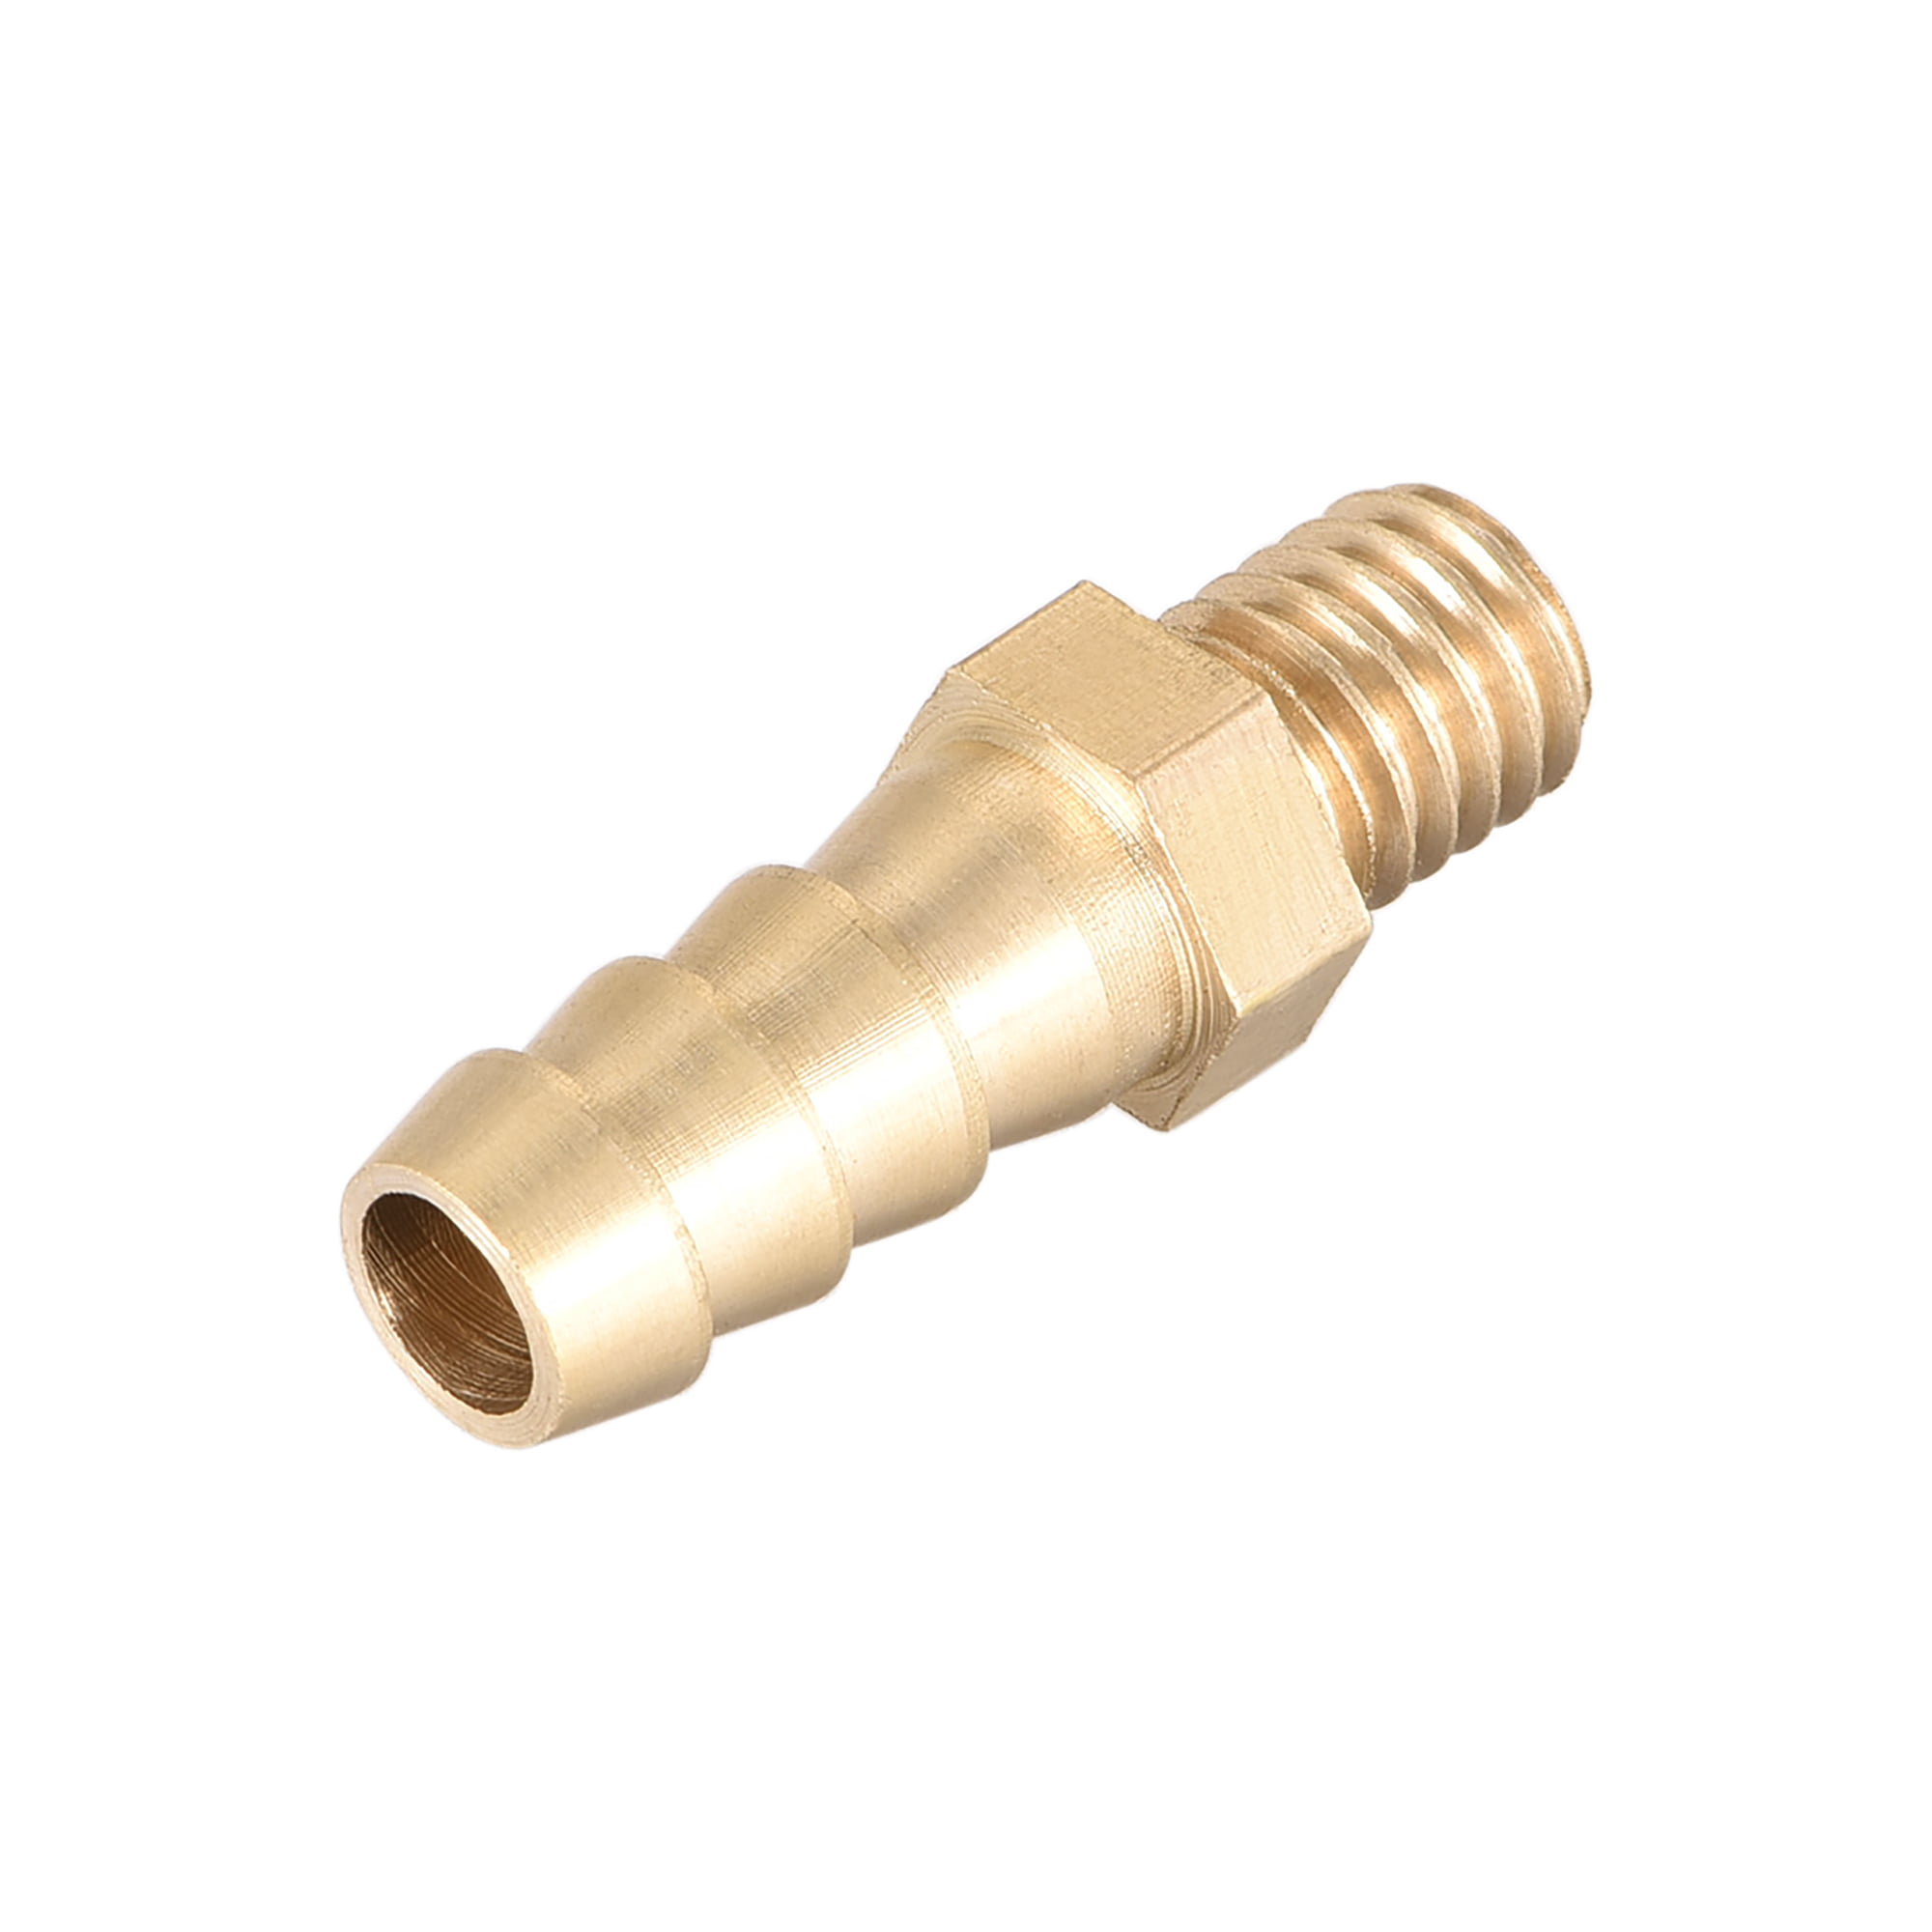 M8 Thread 8mm Hose Barb Tail Male Thread Straight Brass Connector Fitting 1.25 T